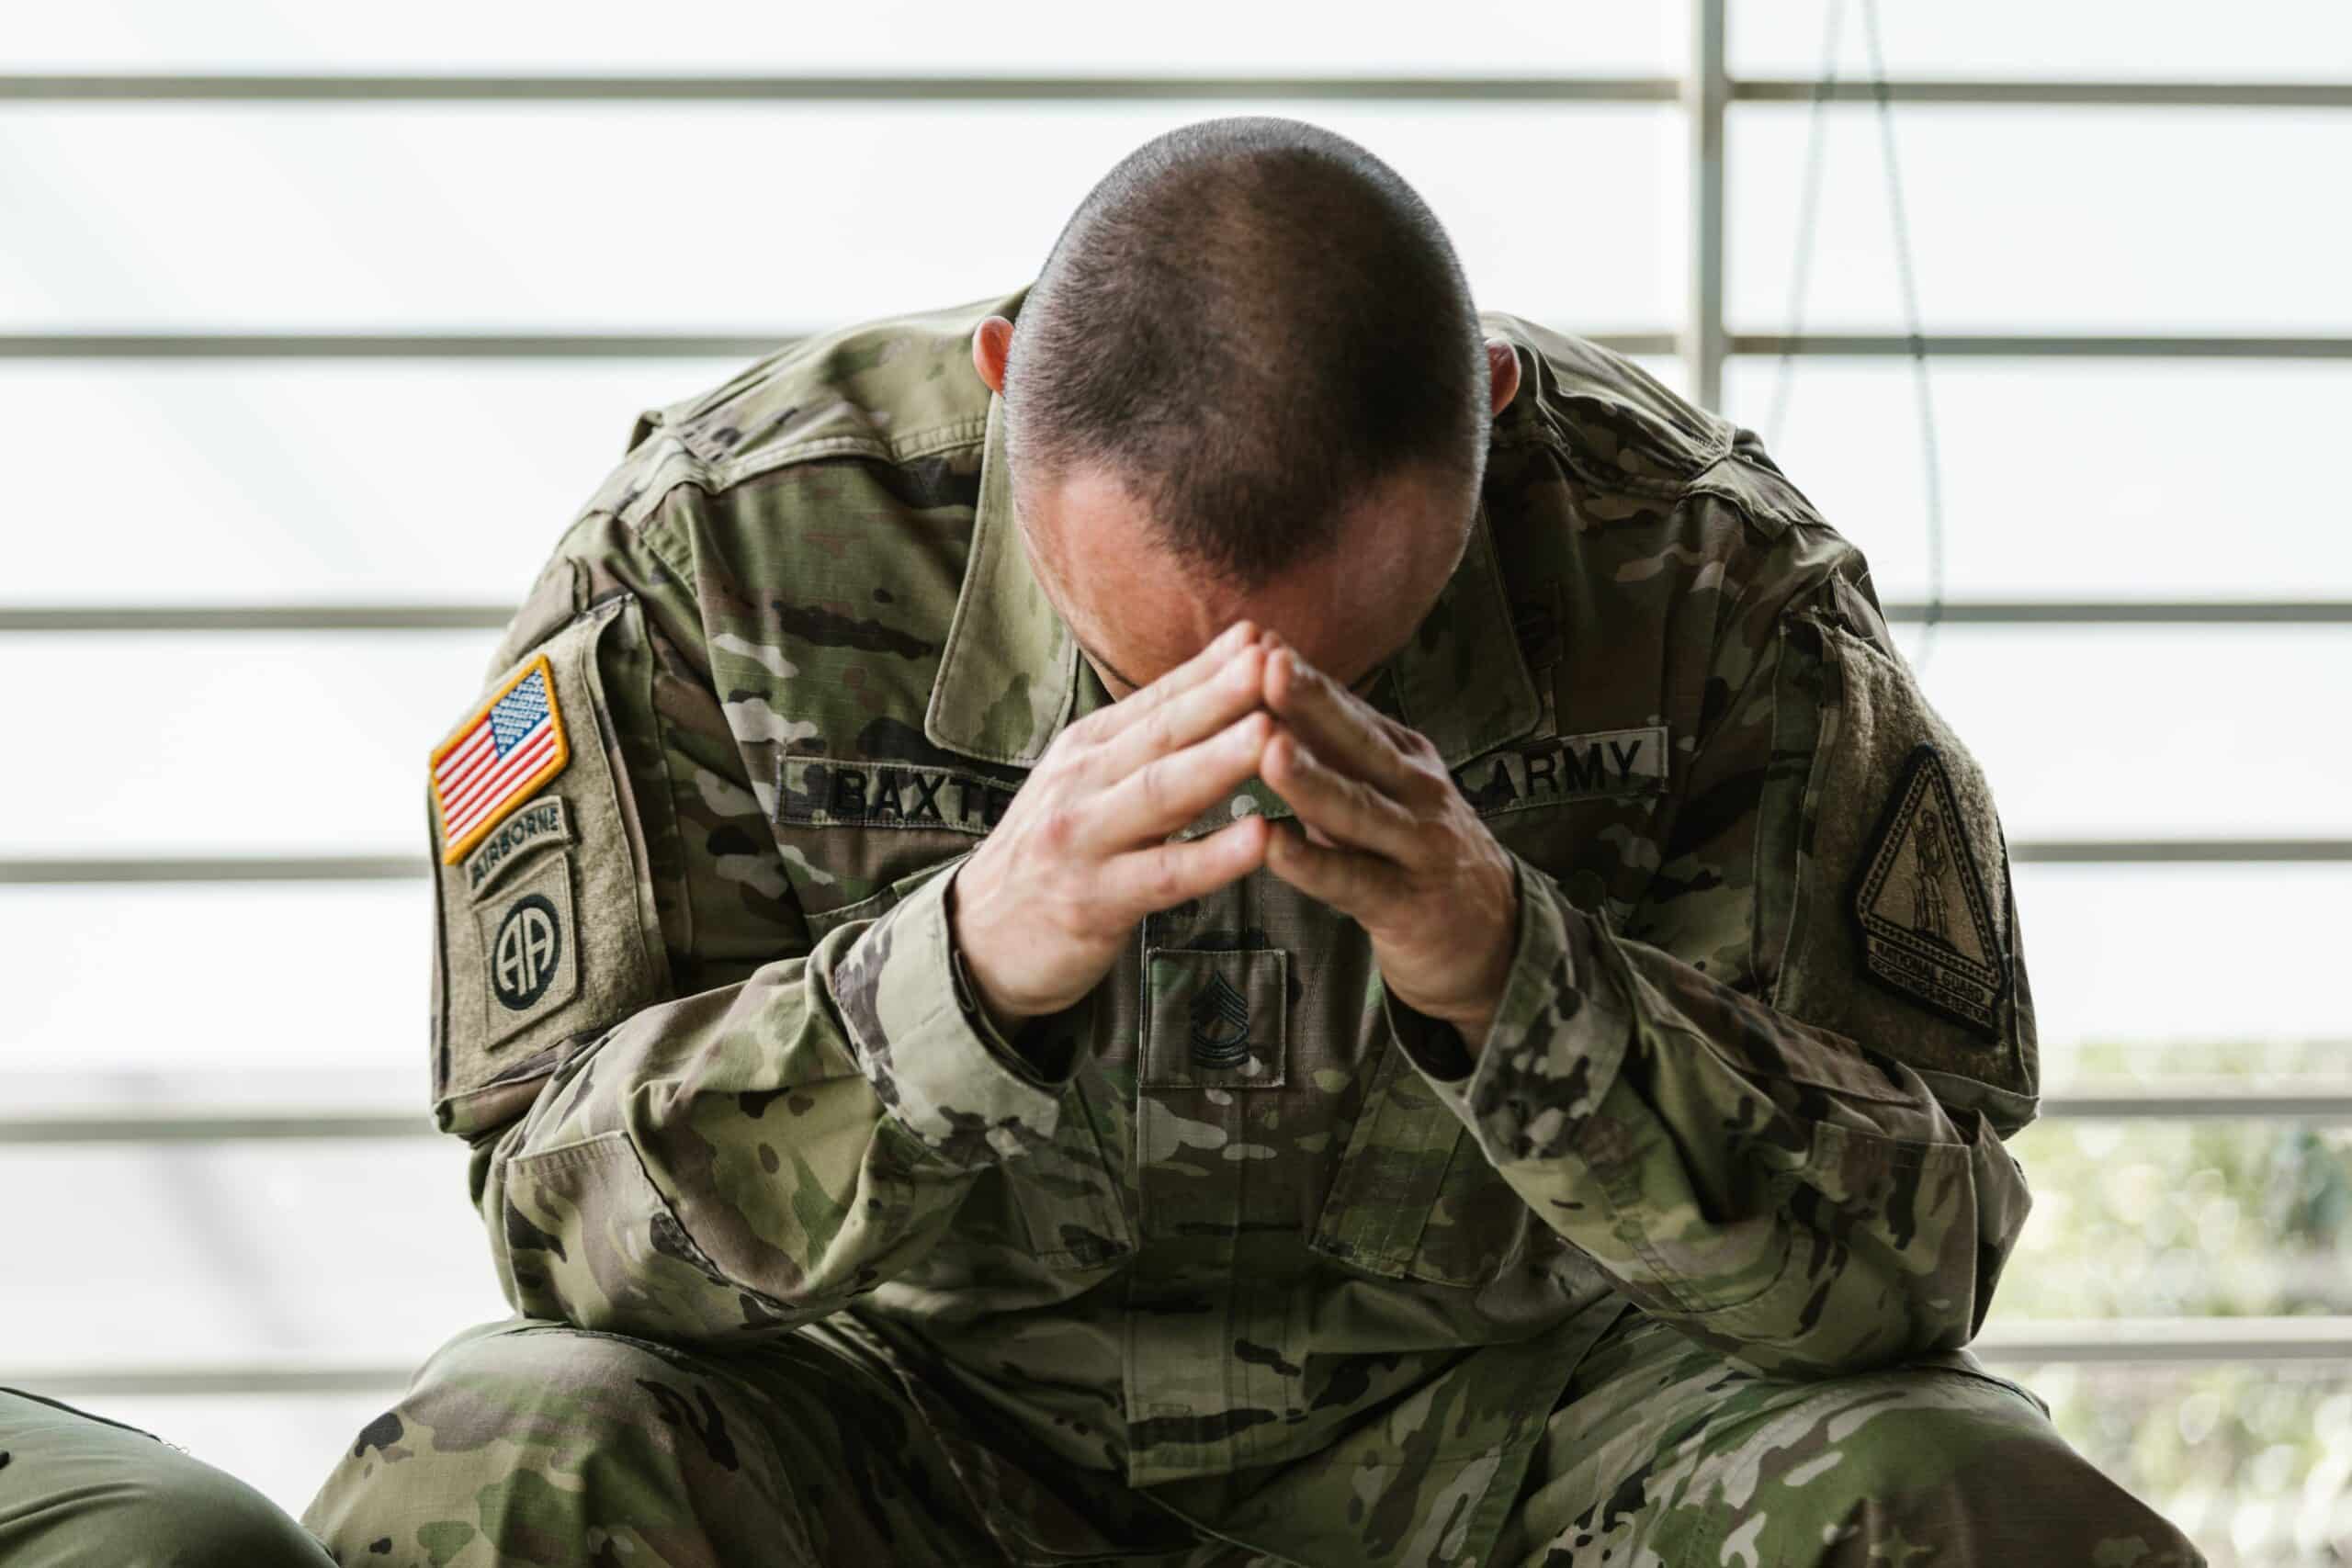 A distressed US soldier in uniform reflecting on his anxiety with his hands on his face, indicative of the need for VA rating for anxiety.